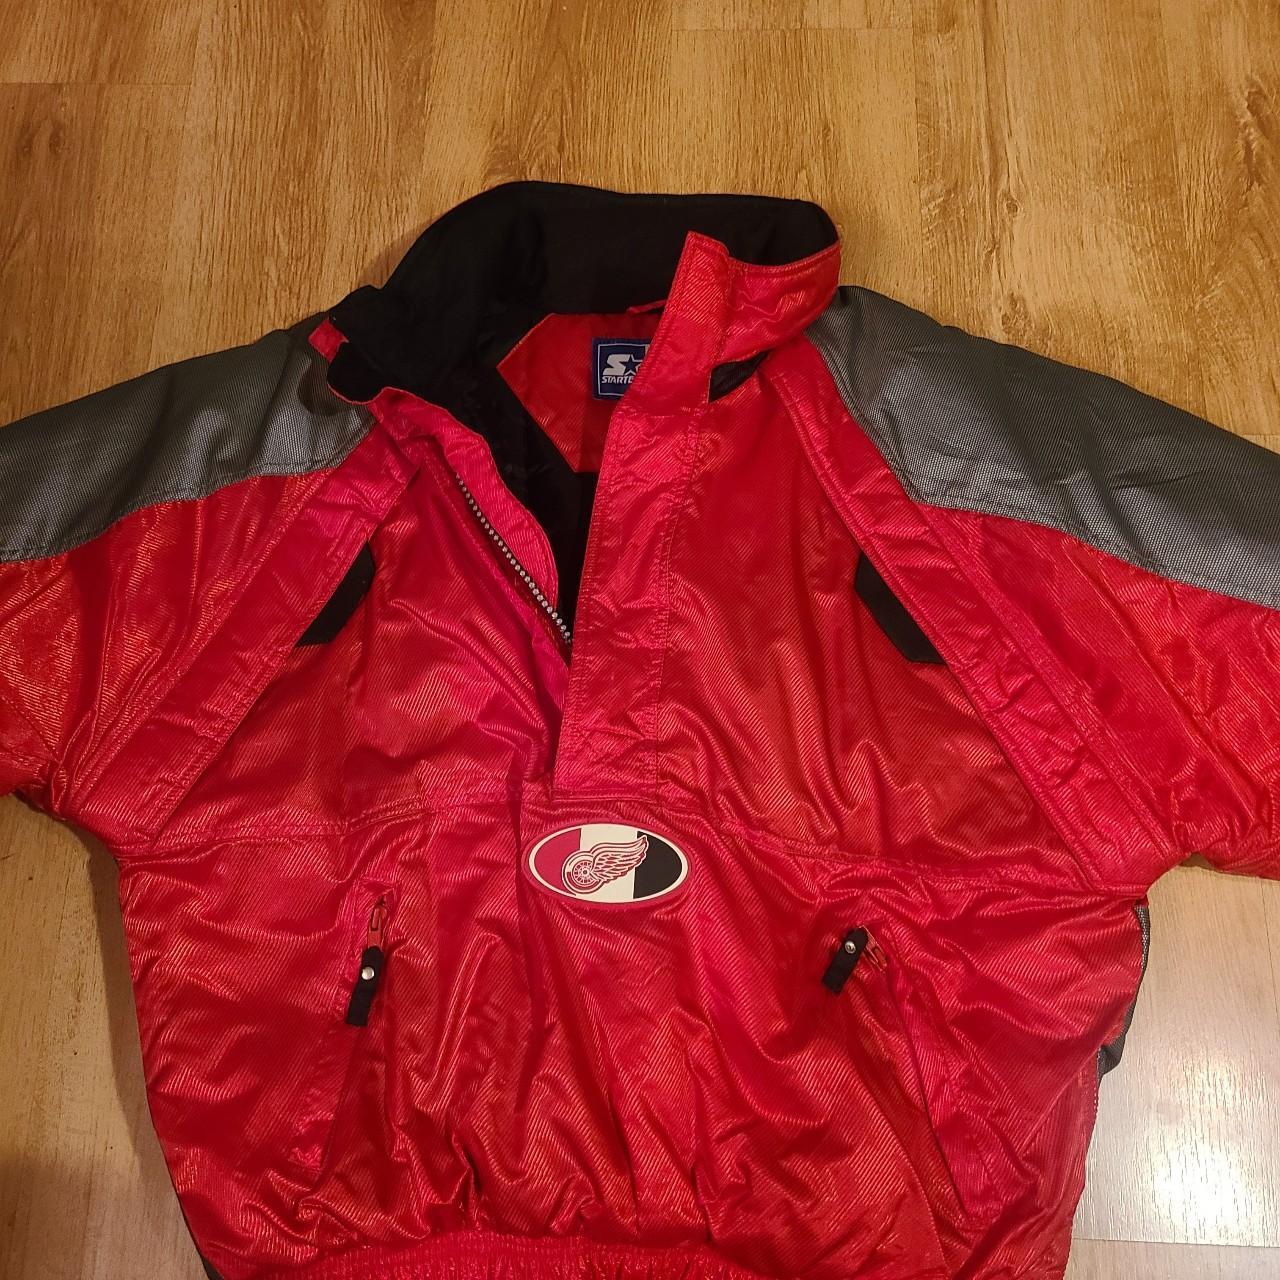 Jackets & Coats, Vintage Red Wings Jacket